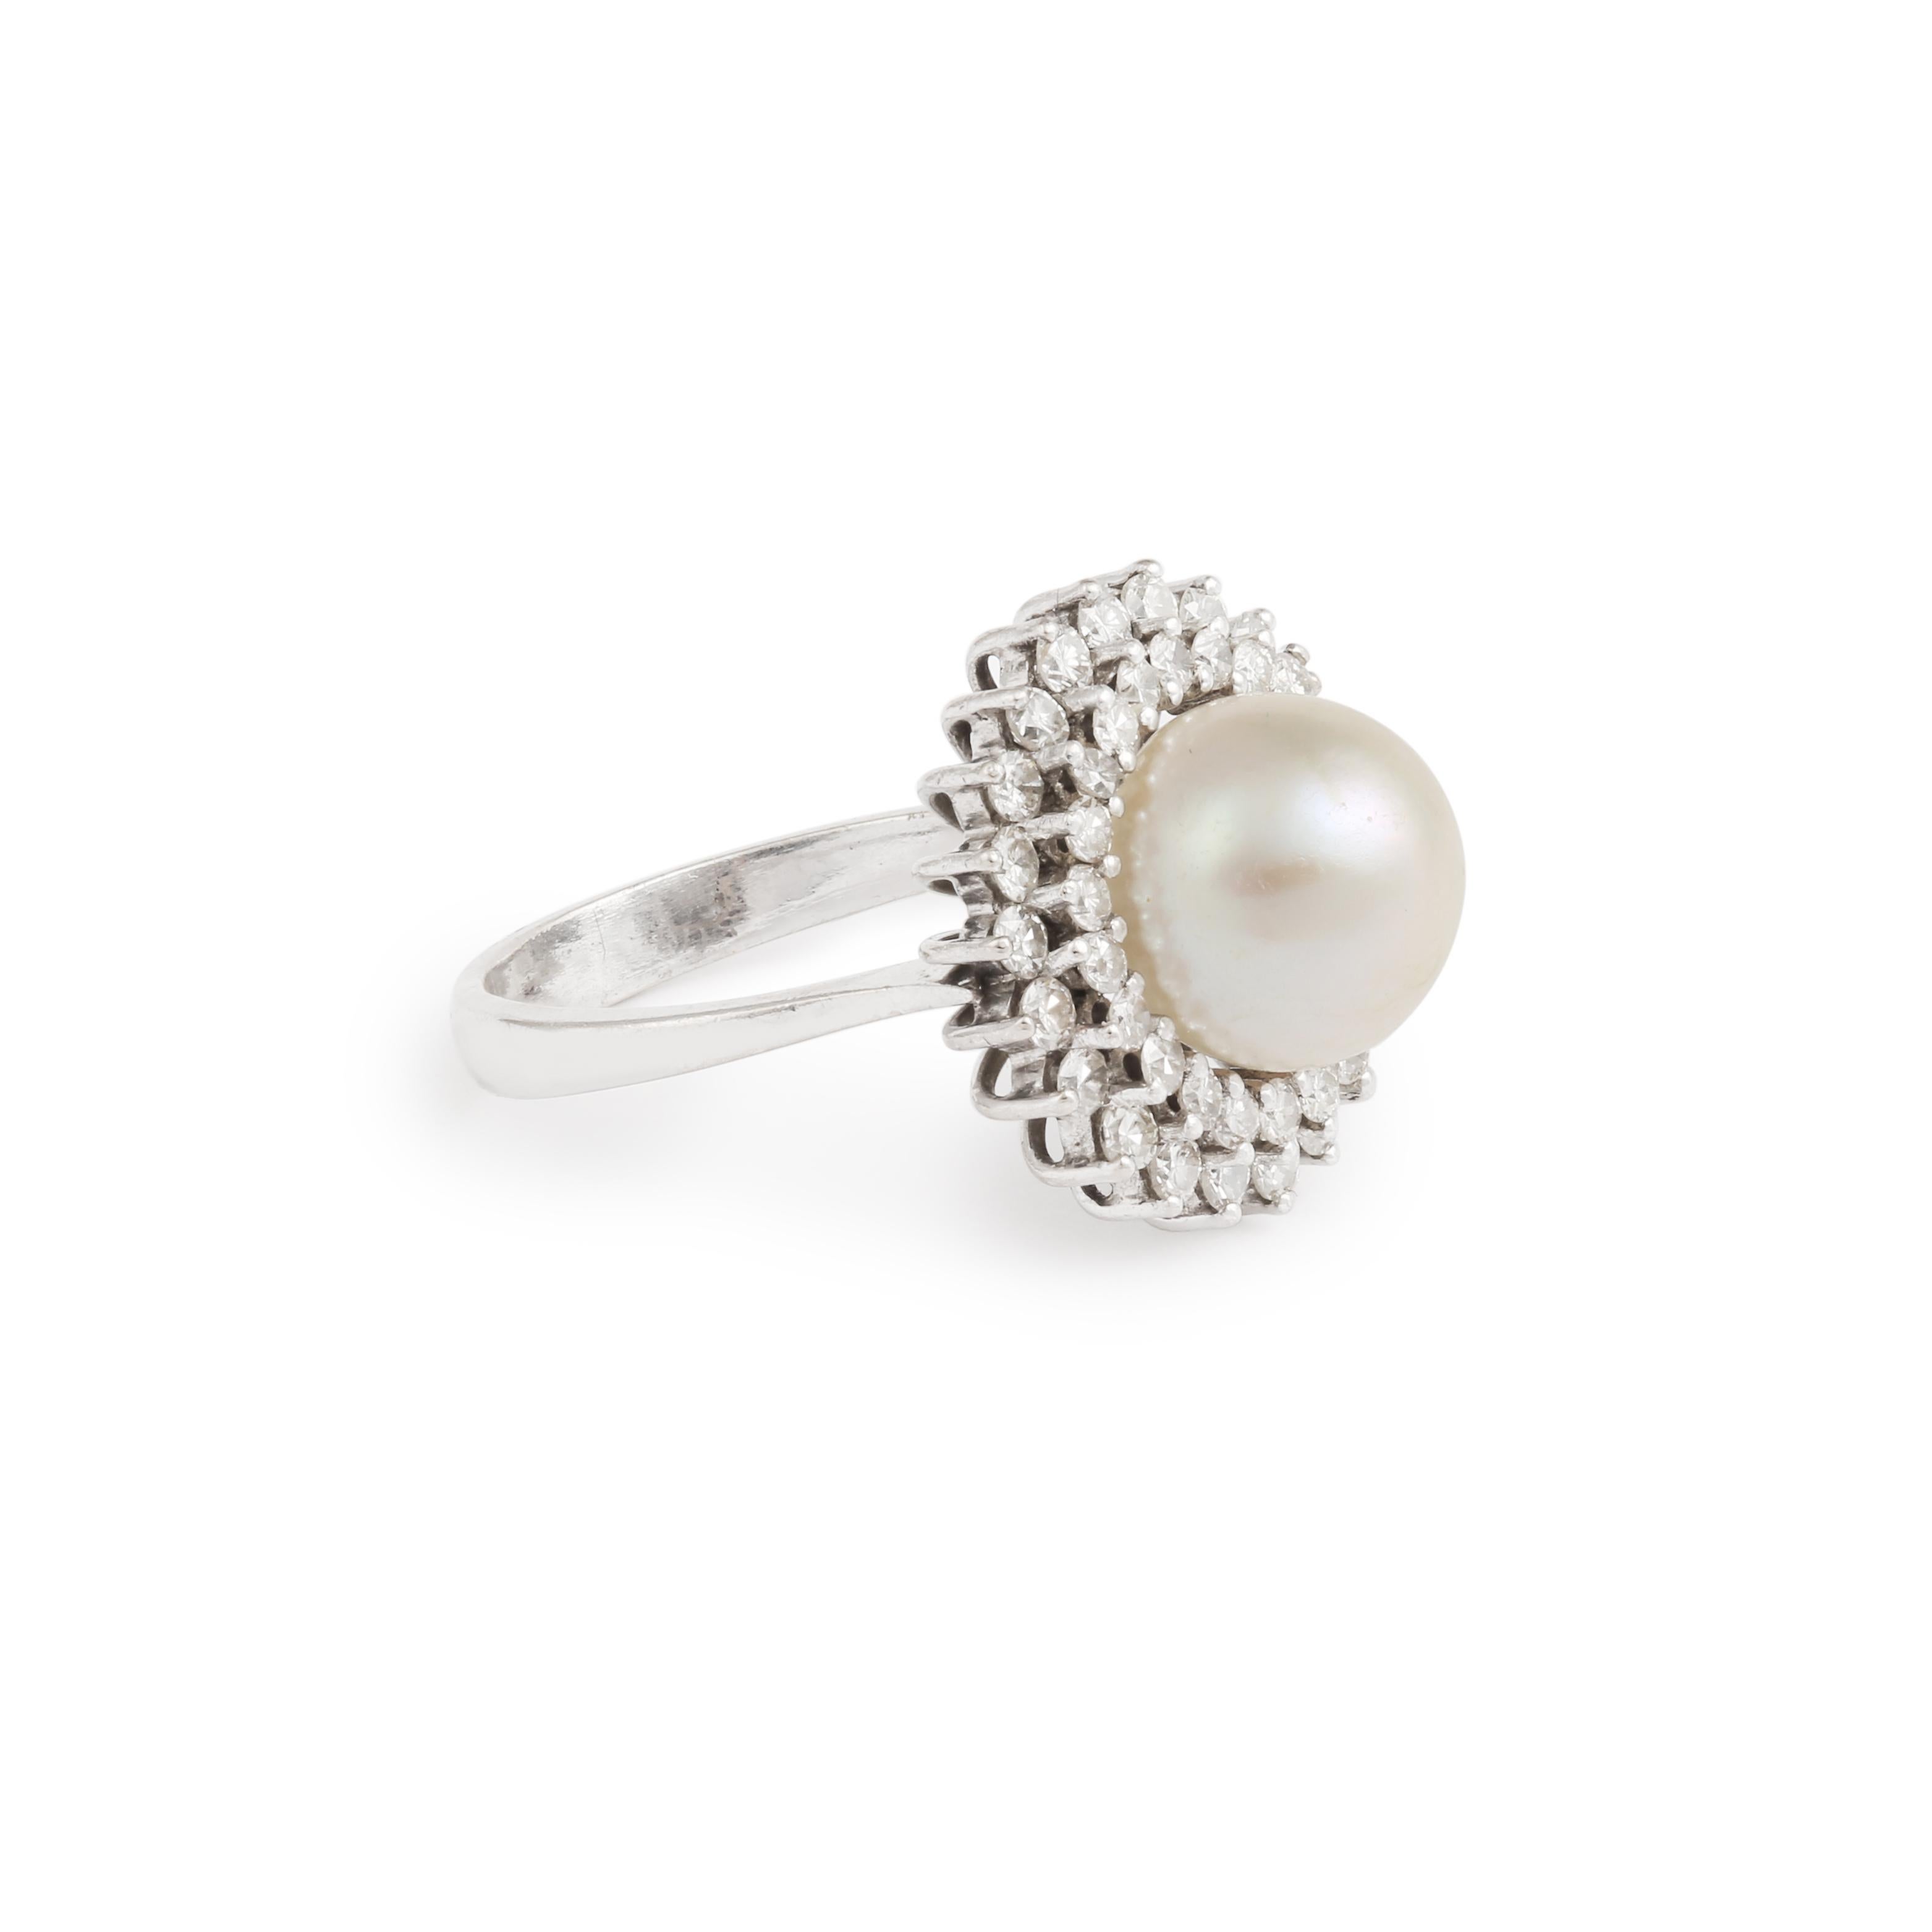 White gold daisy ring set with a pearl surrounded by brilliant-cut diamonds.

Pearl diameter: 10.36 mm (0.407 inch)

Total estimated weight of diamonds: 0.60 carats

Dimensions: 18.20 x 18.20 x 11.88 mm (0.716 x 0.716 x 0.467 inch)

Finger size : 55